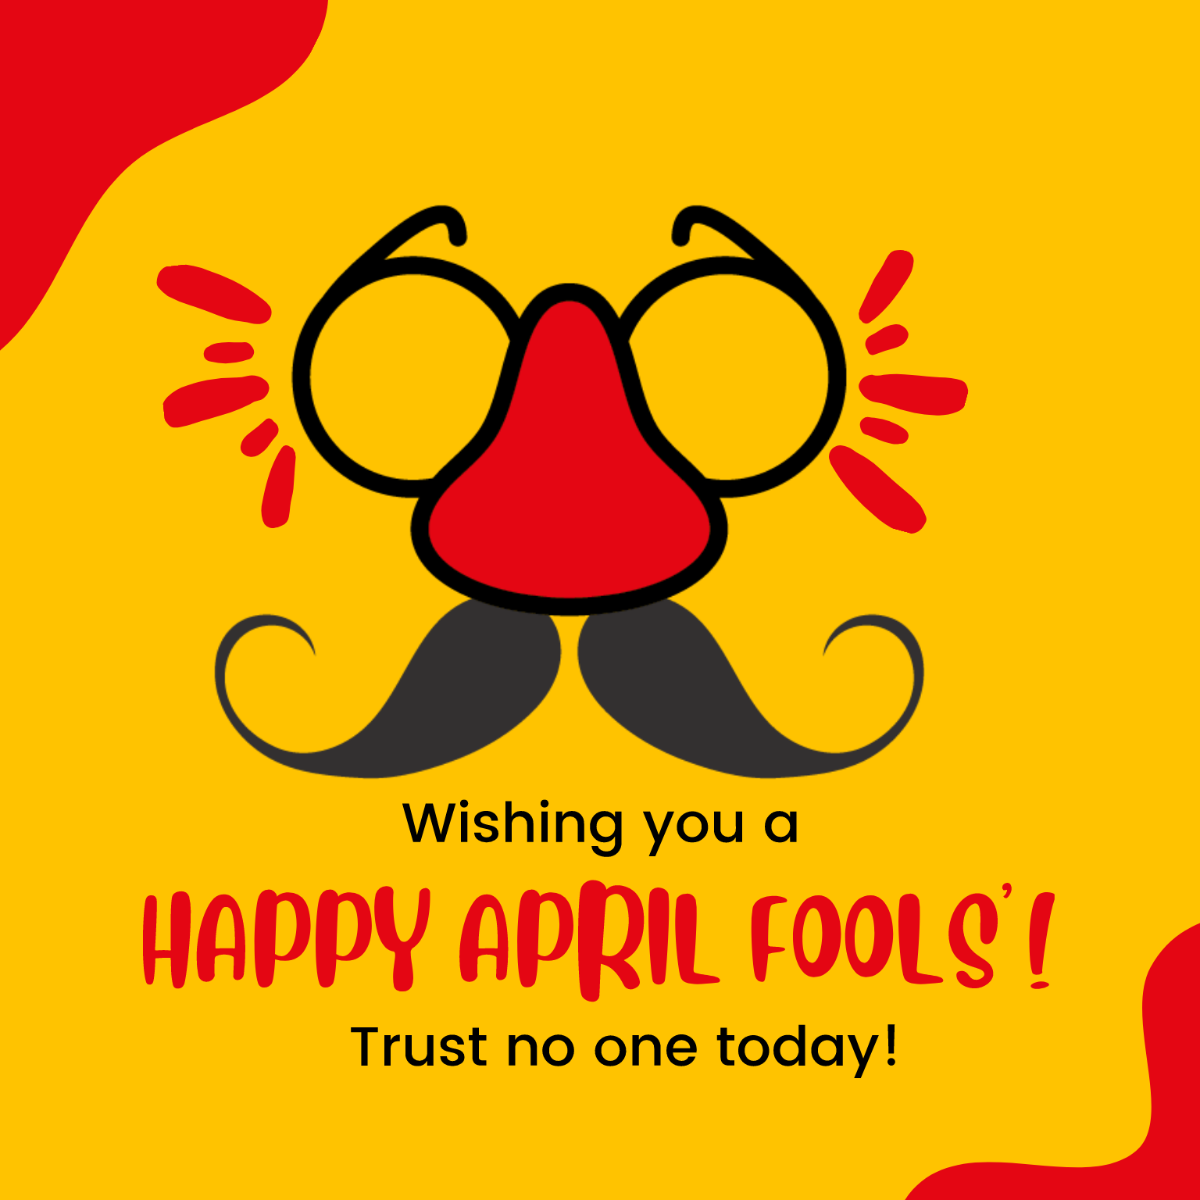 April Fools' Day Wishes Vector Template